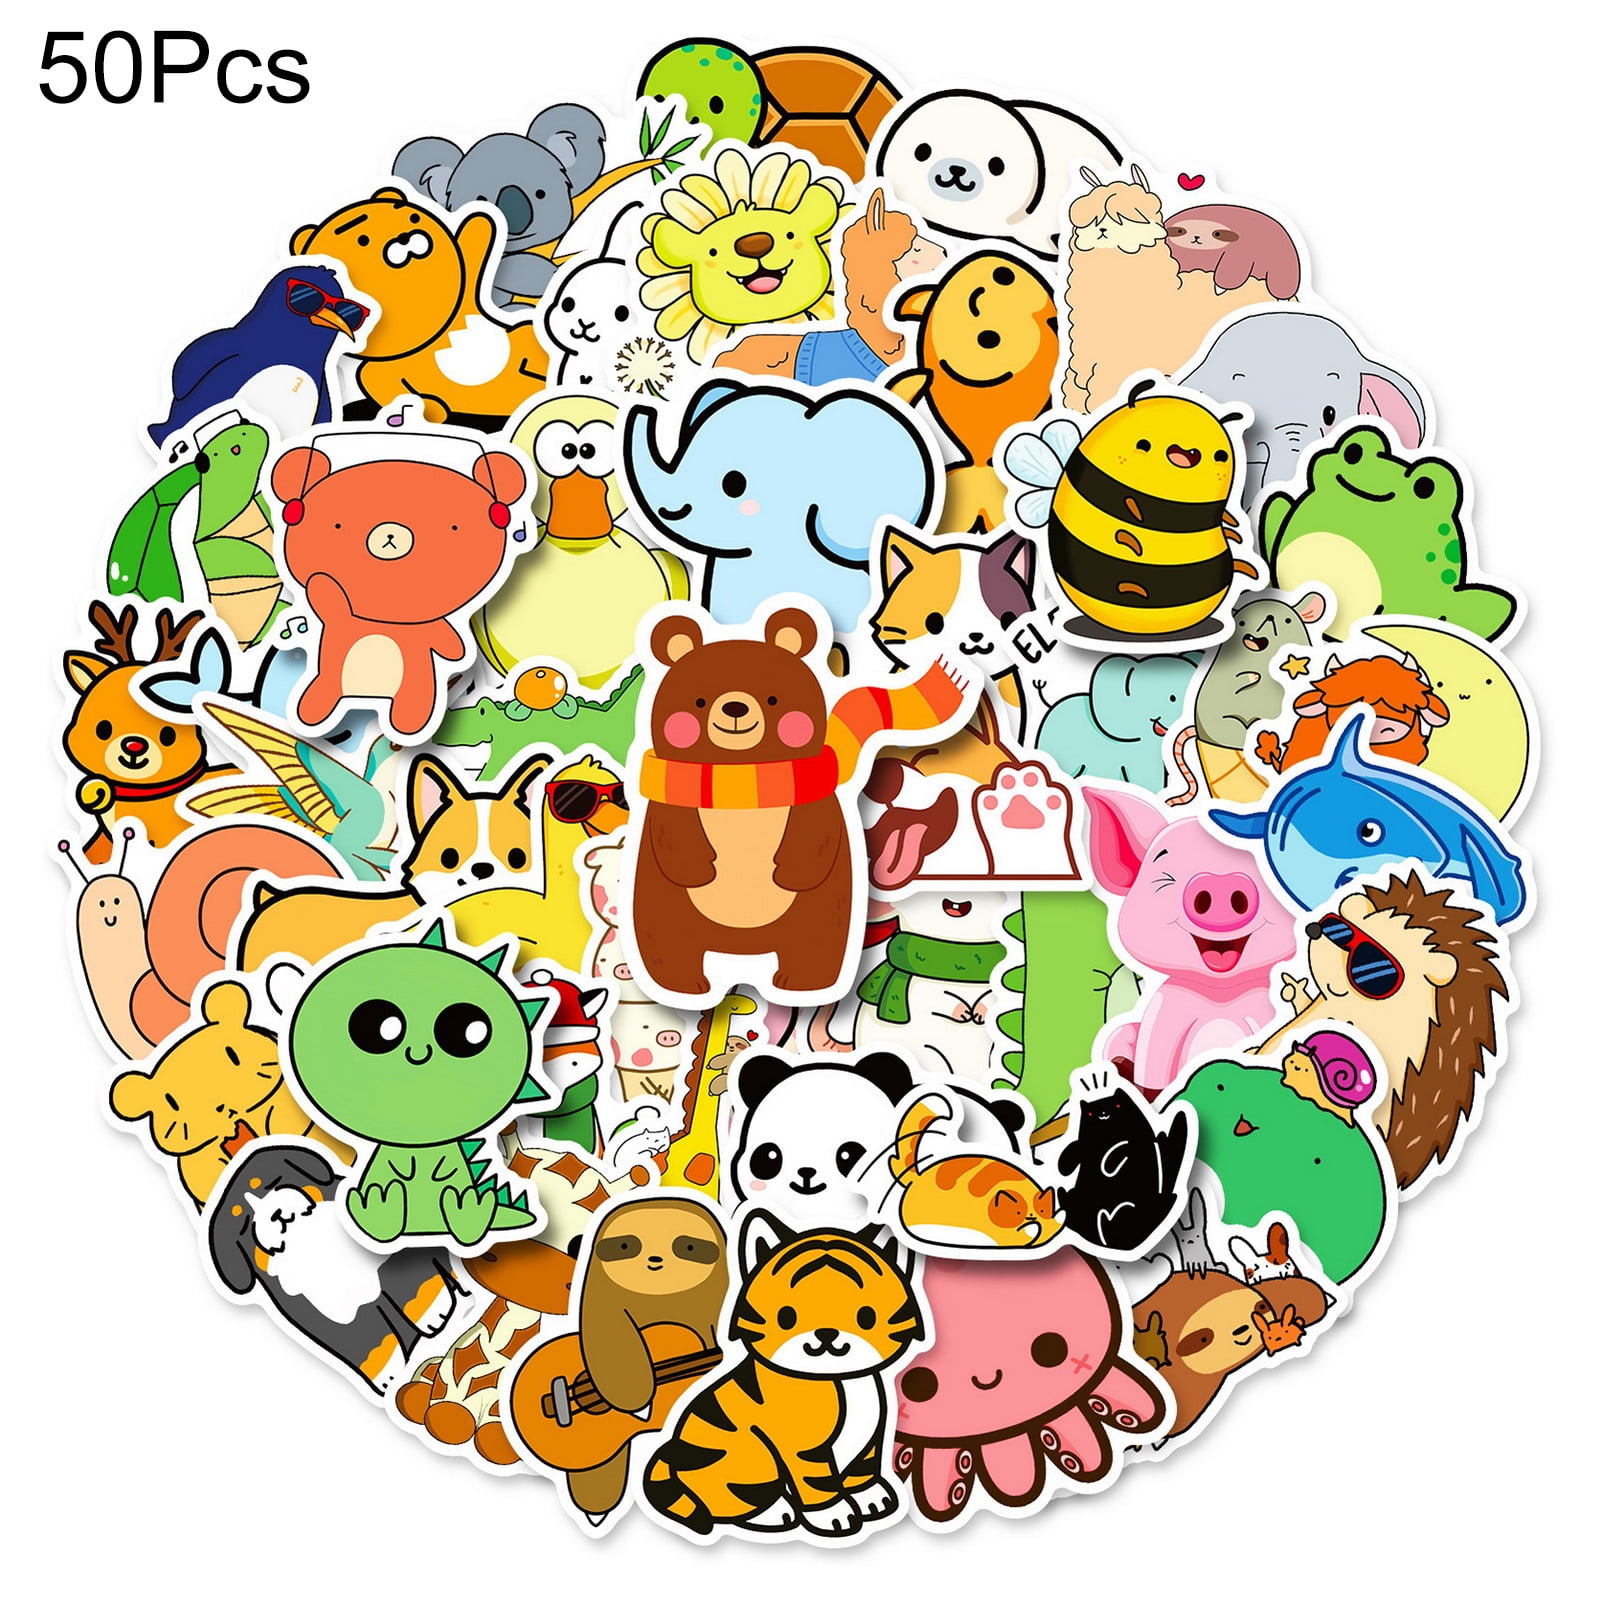  LIFEBE Cute Animal Stickers for Kids 100pcs, Farm Animal  Stickers for Water Bottles, Vinyl Aesthetic Zoo Animal Stickers Decals for  Laptop, Teens : Toys & Games